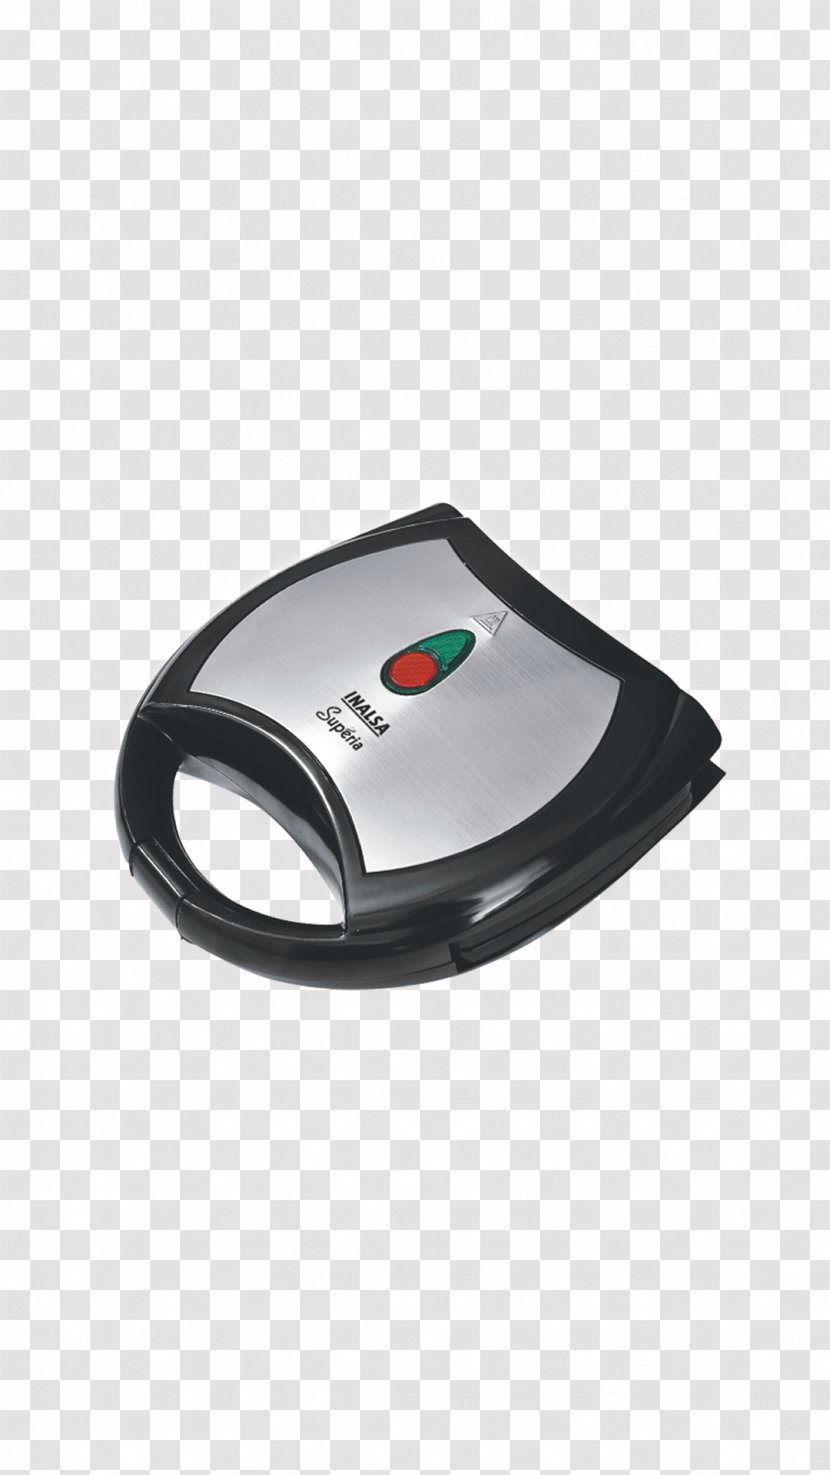 Toast Sandwich Small Appliance Panini Pie Iron - Toaster Transparent PNG